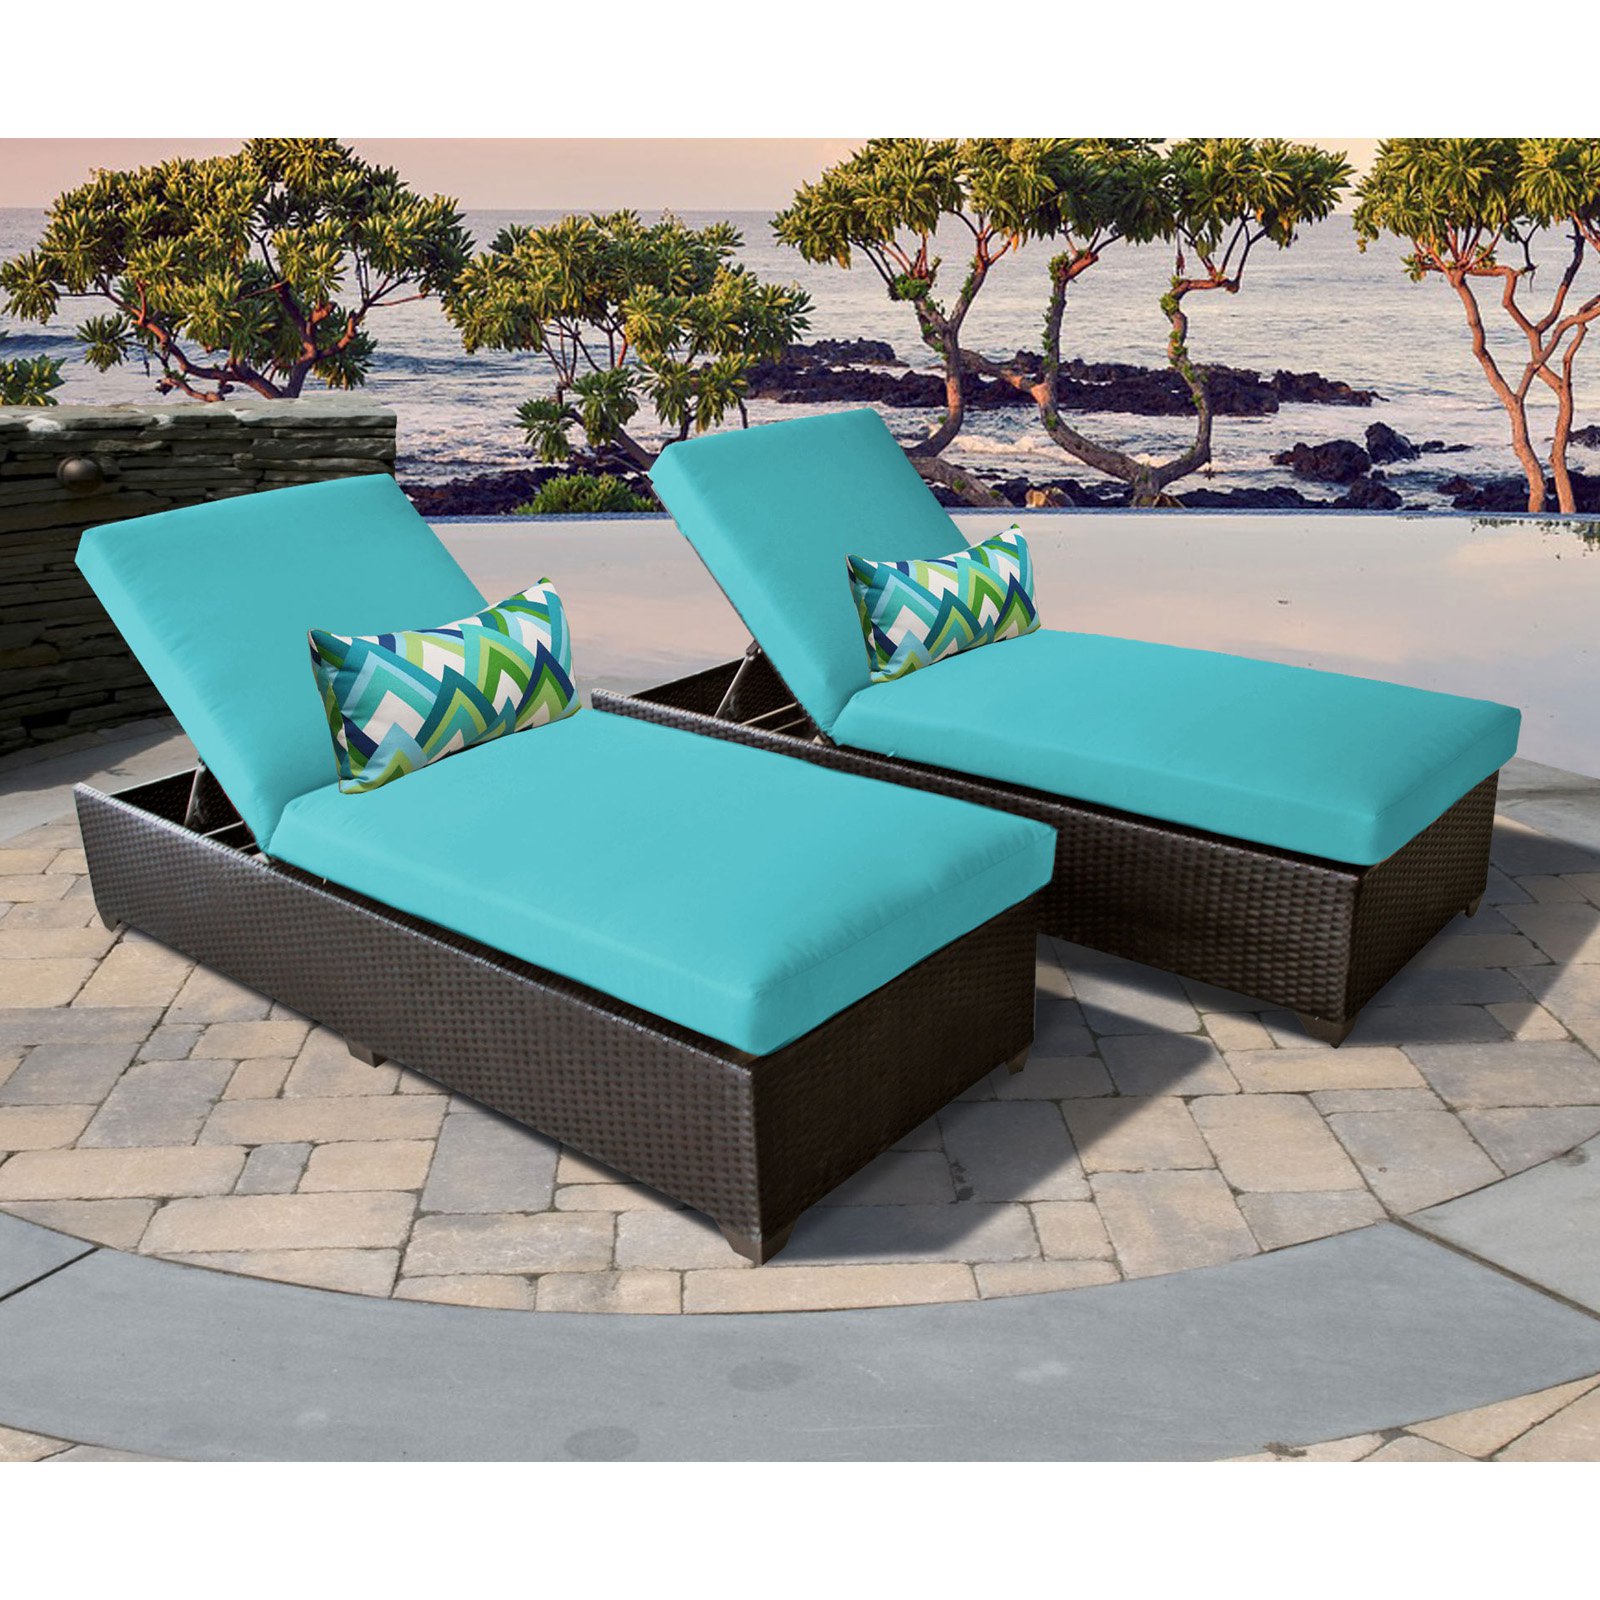 Belle Chaise Set of 2 Outdoor Wicker Patio Furniture-Color:Tangerine - image 3 of 11